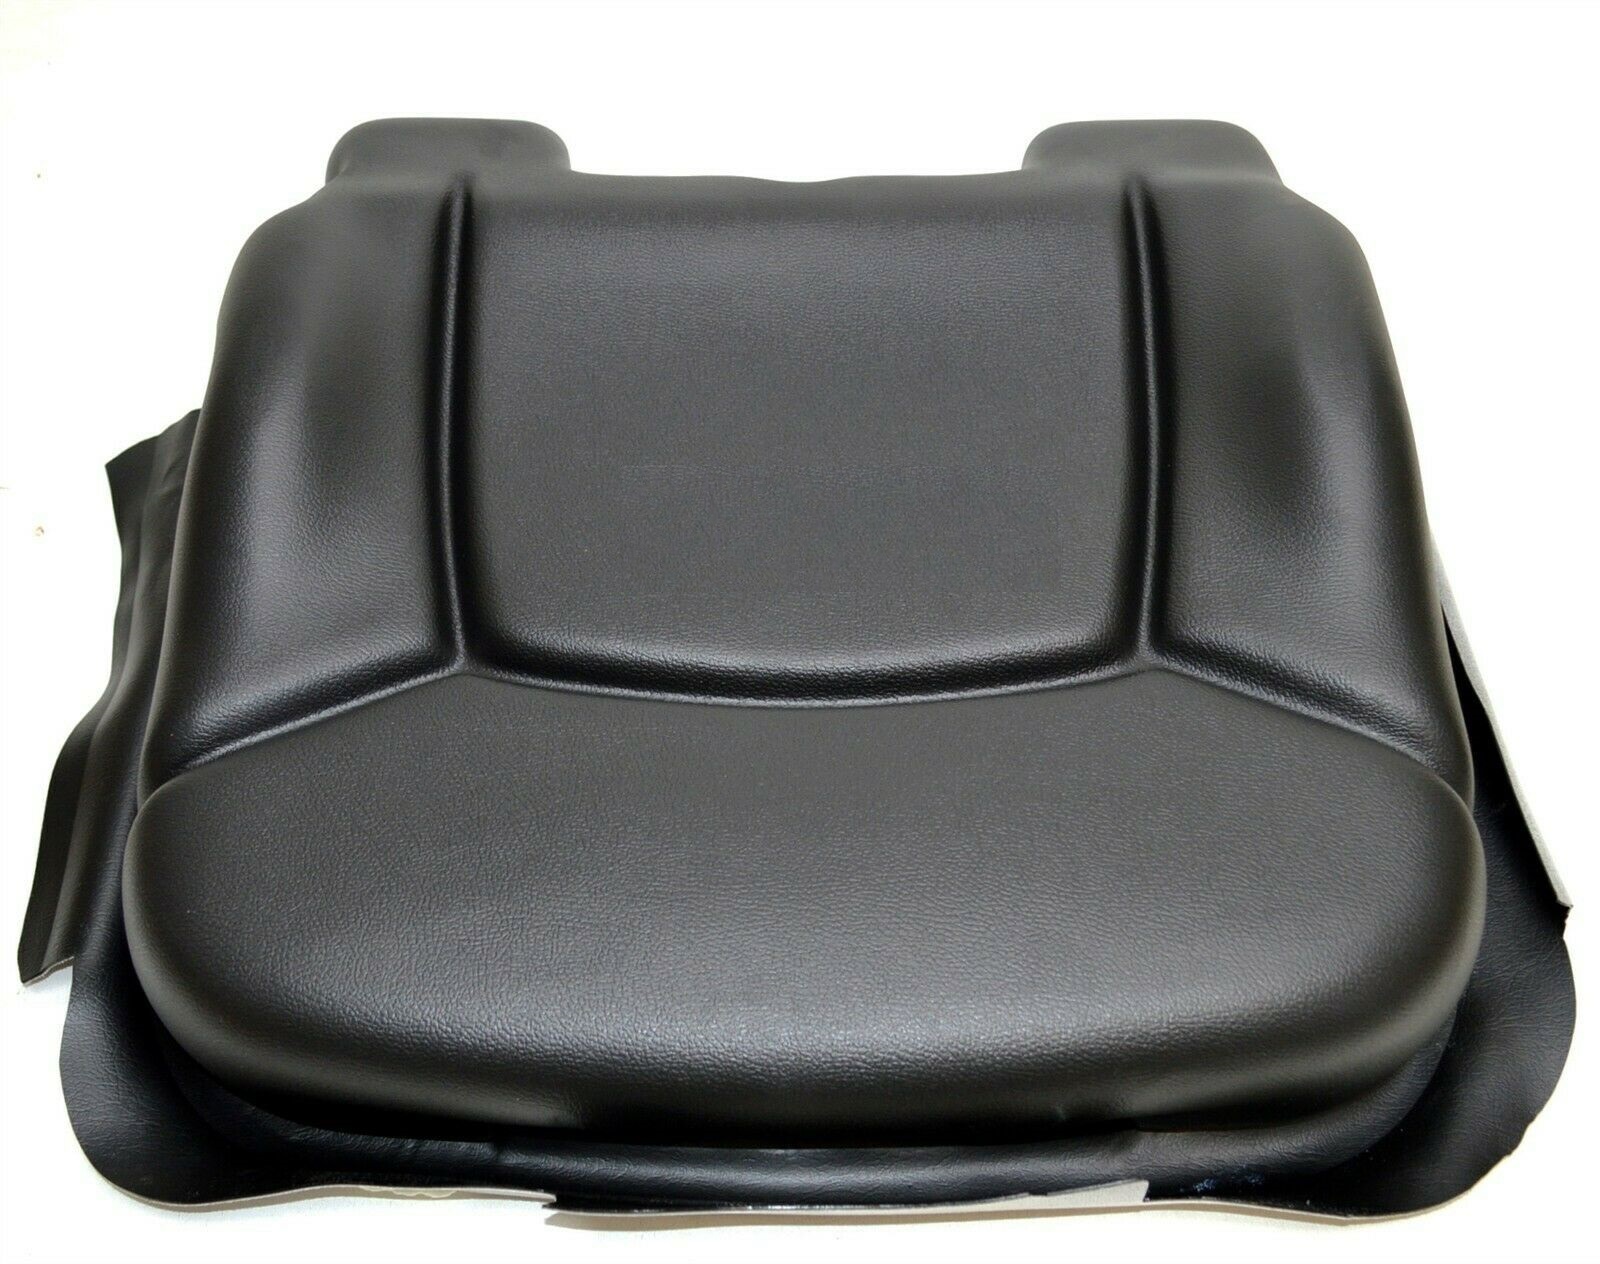 Ultra Seating - Forklift Bottom Cushion Assy, Black Cloth. Fits